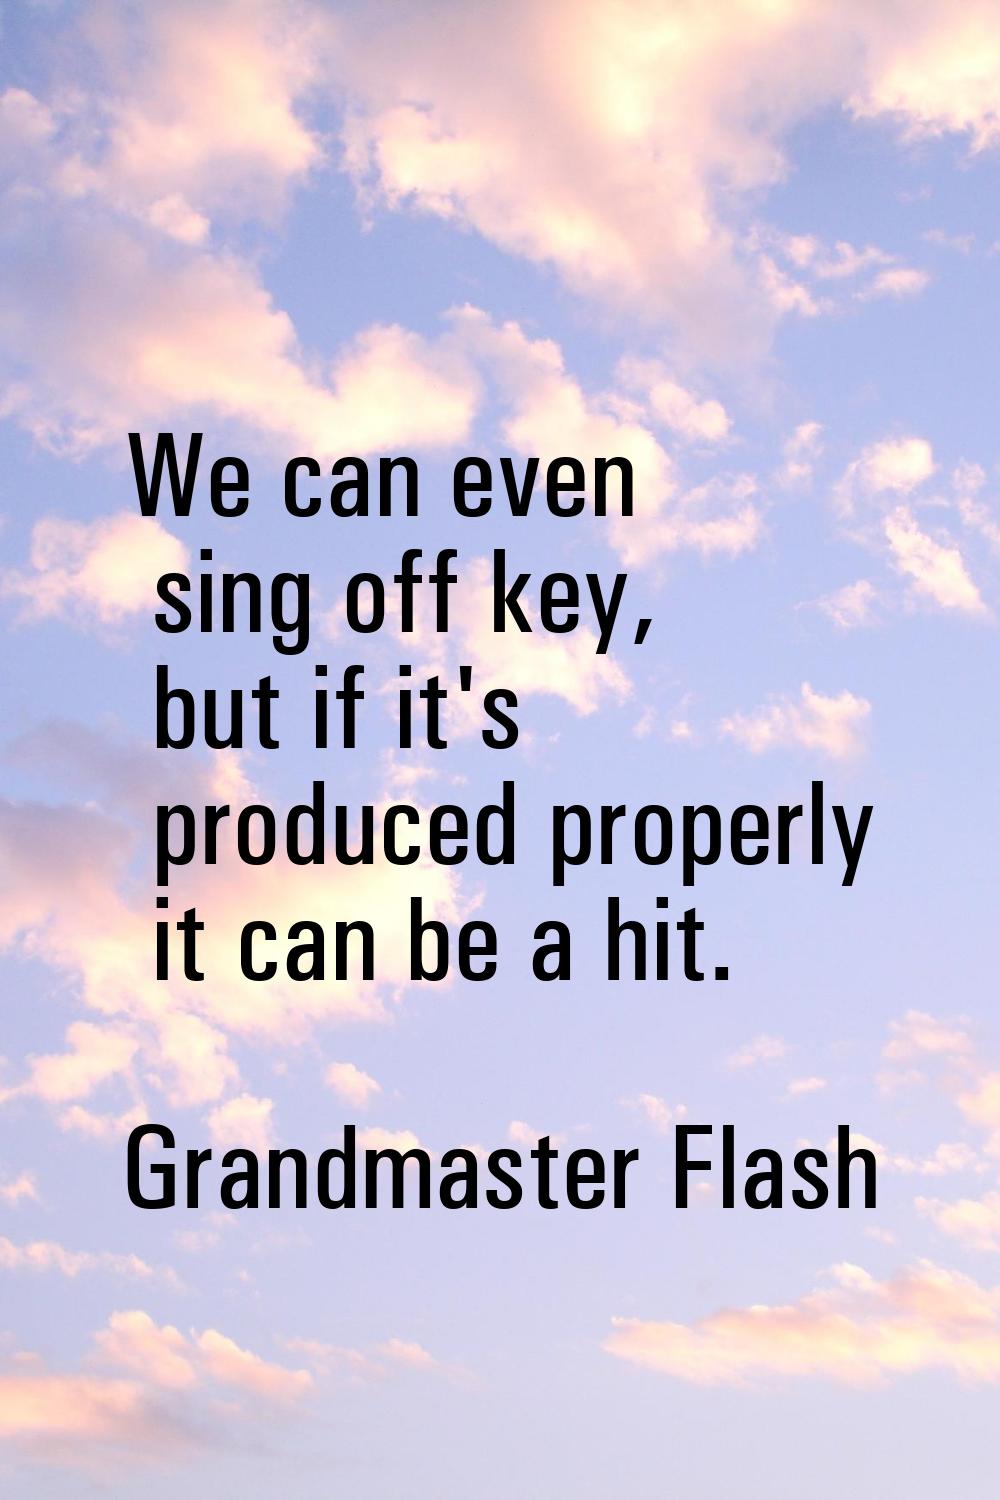 We can even sing off key, but if it's produced properly it can be a hit.